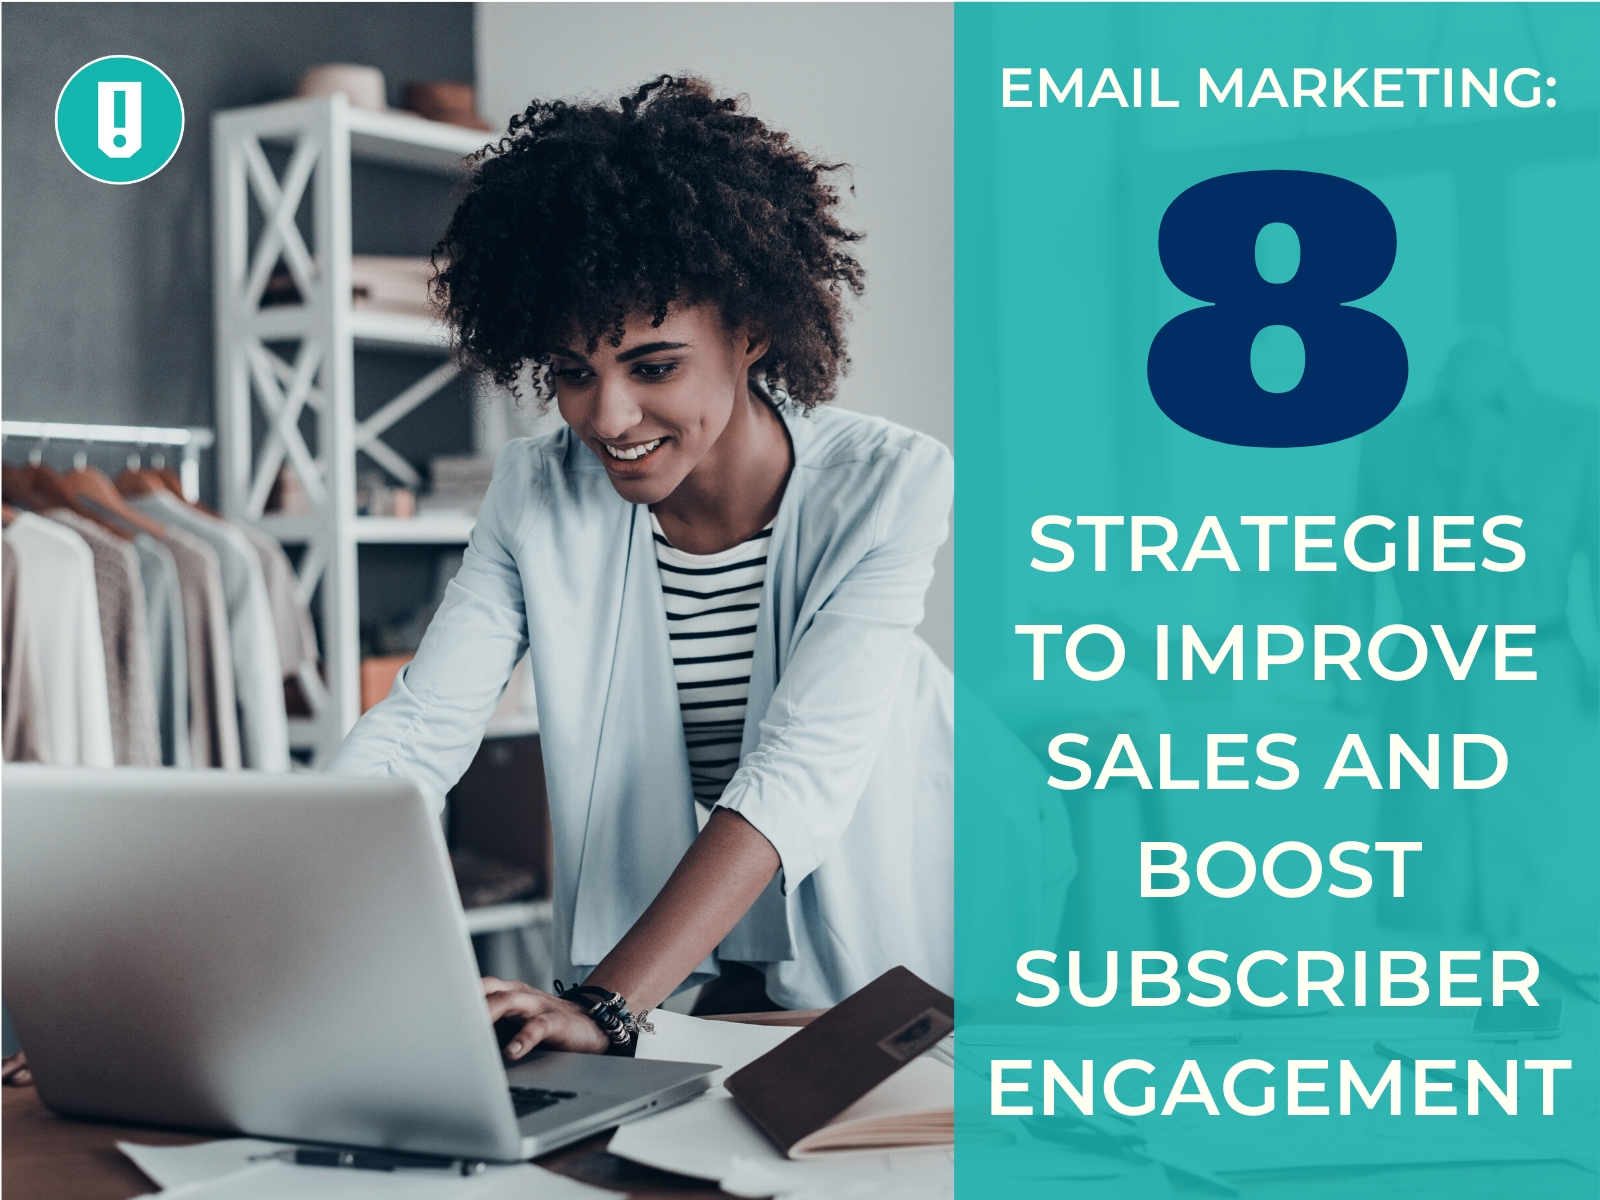 Email Marketing: 8 Strategies To Improve Sales And Boost Subscriber Engagement